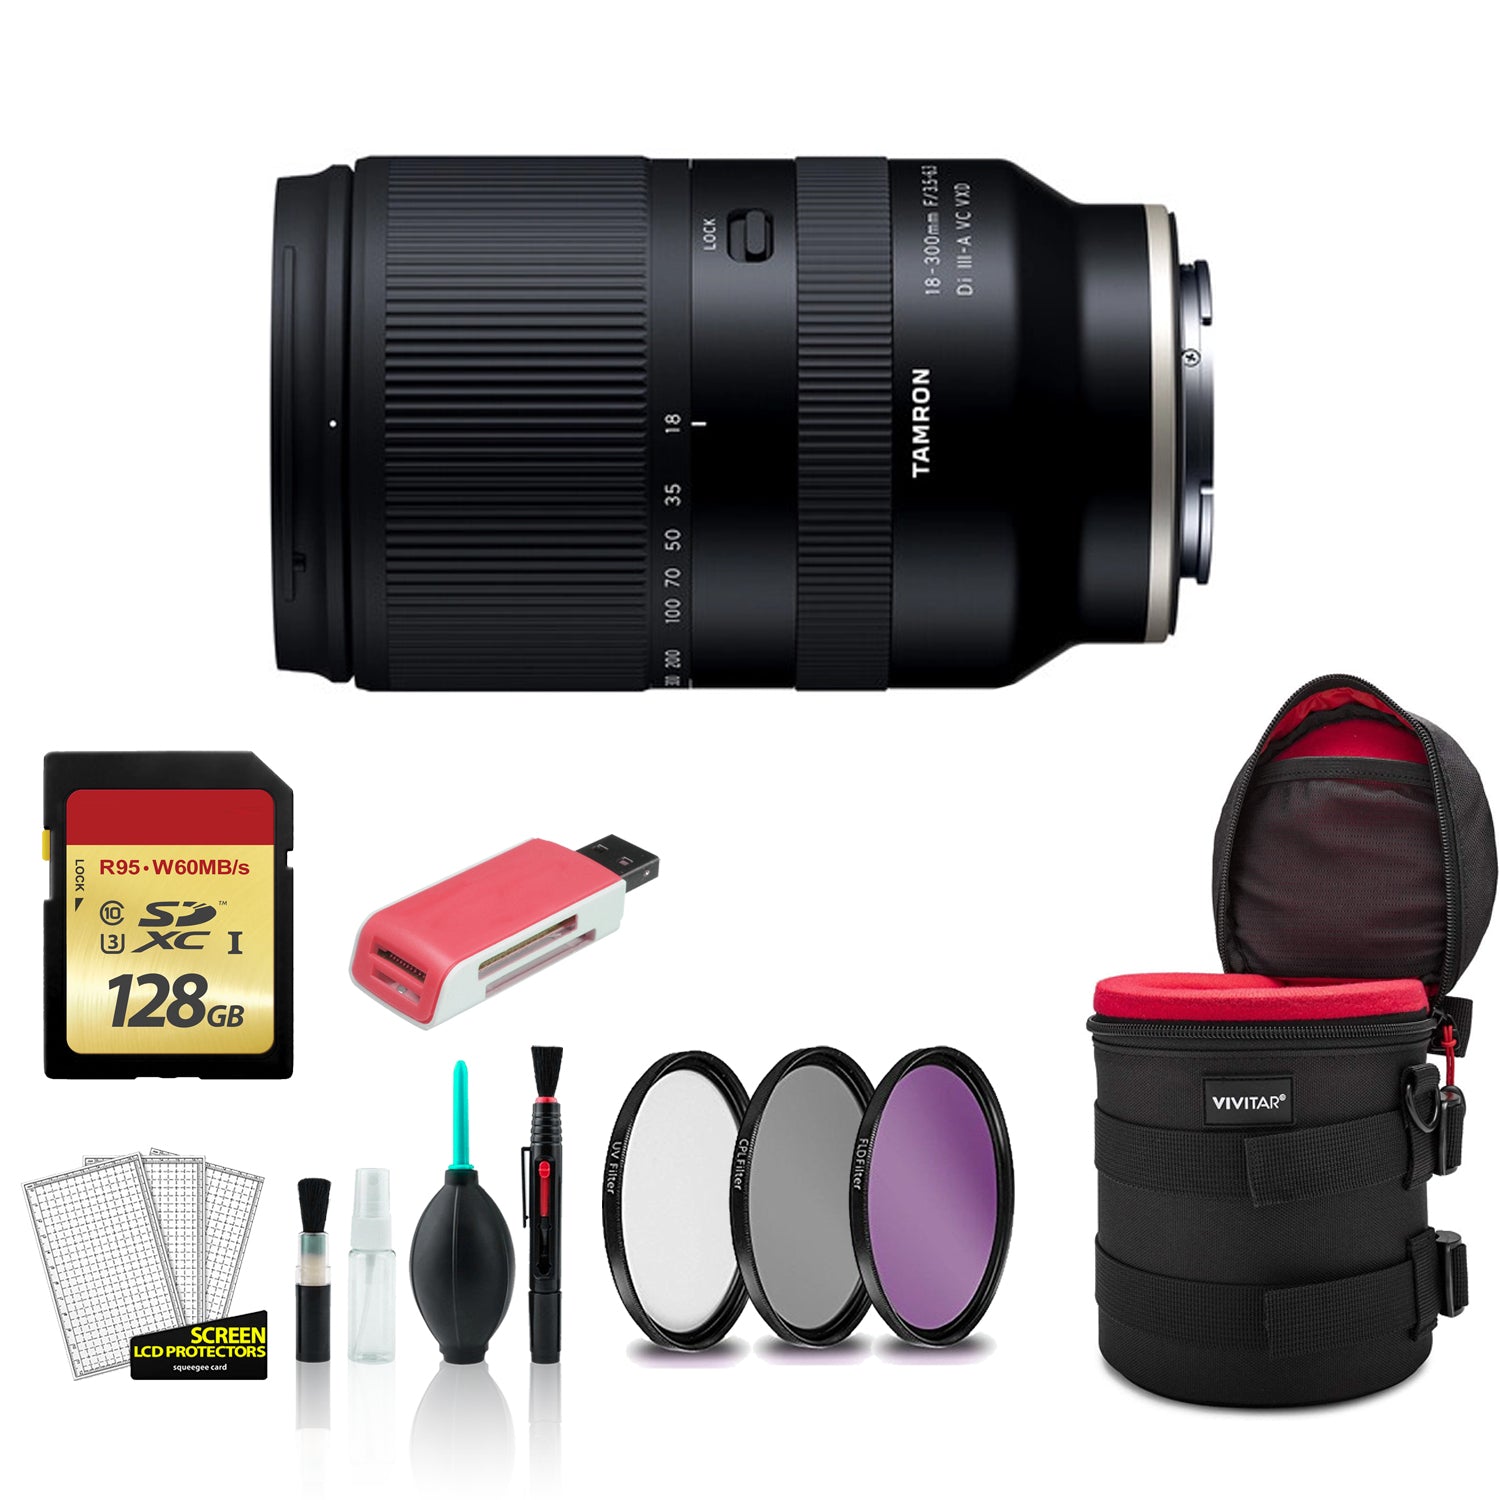 Tamron 18-300mm Lens for Sony E - Kit with 128GB Memory Card + More